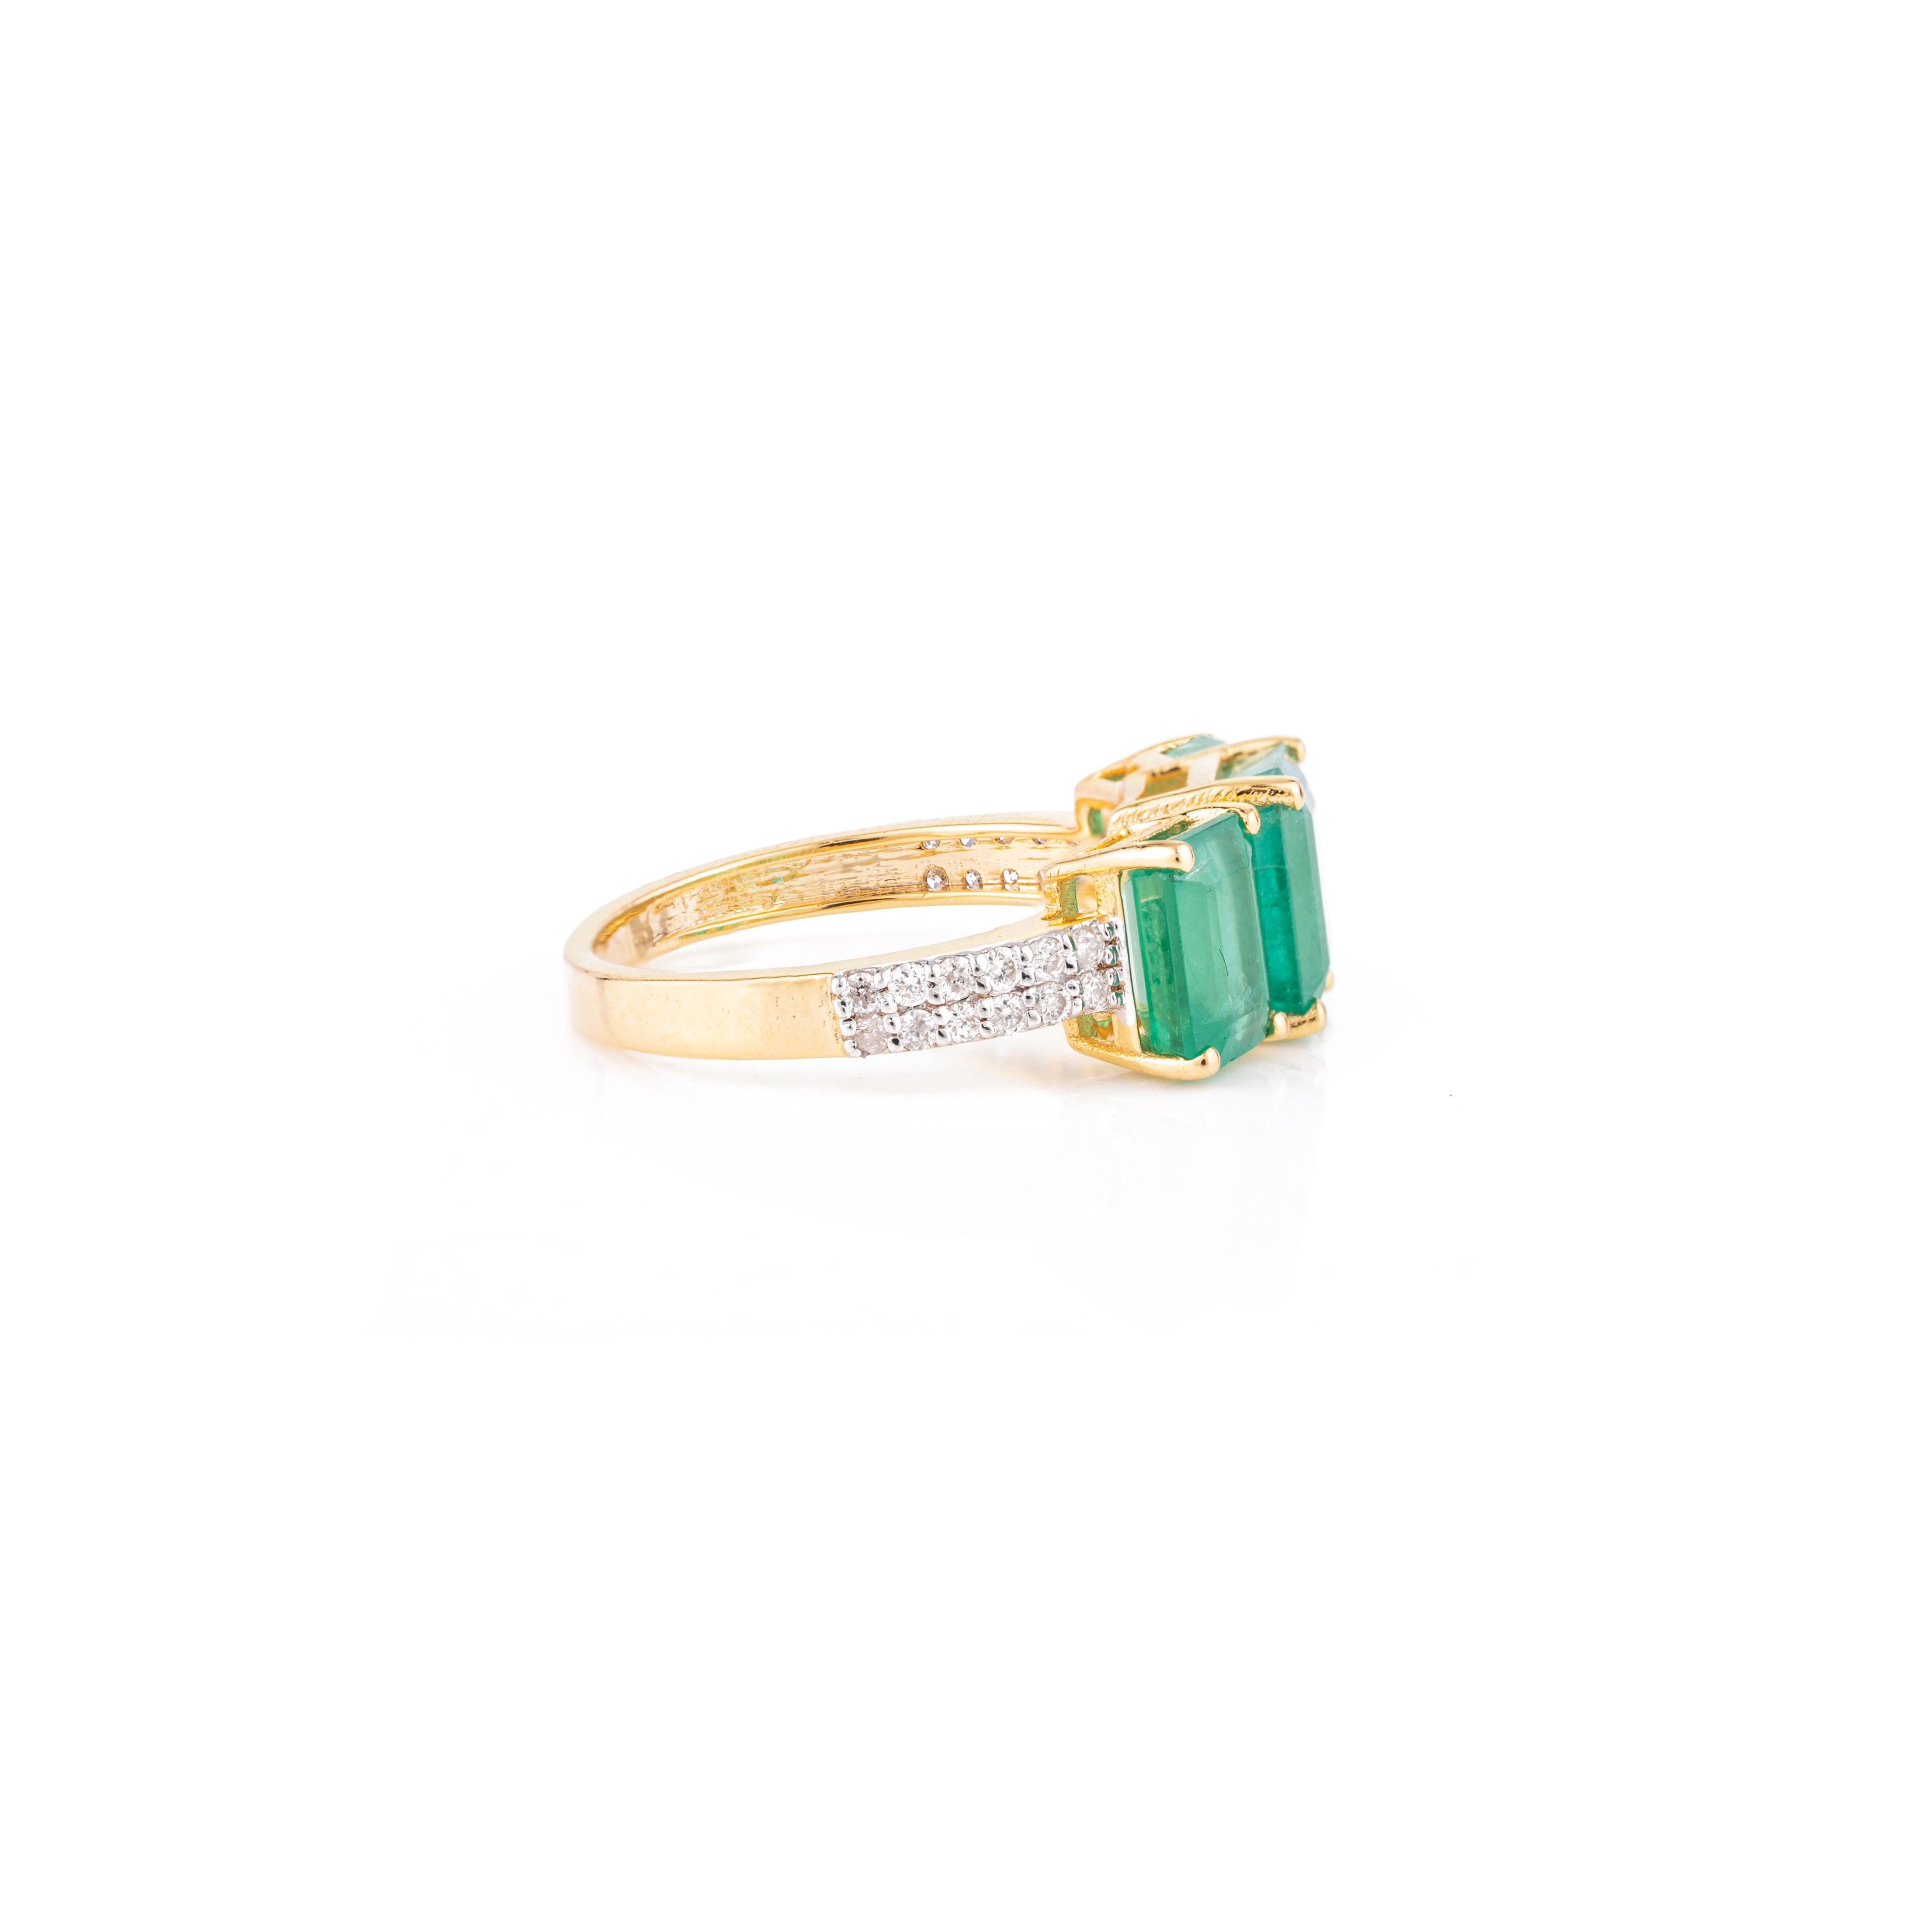 For Sale:  Genuine 4.14 CTW Three Stone Emerald Ring in 18k Solid Yellow Gold  4